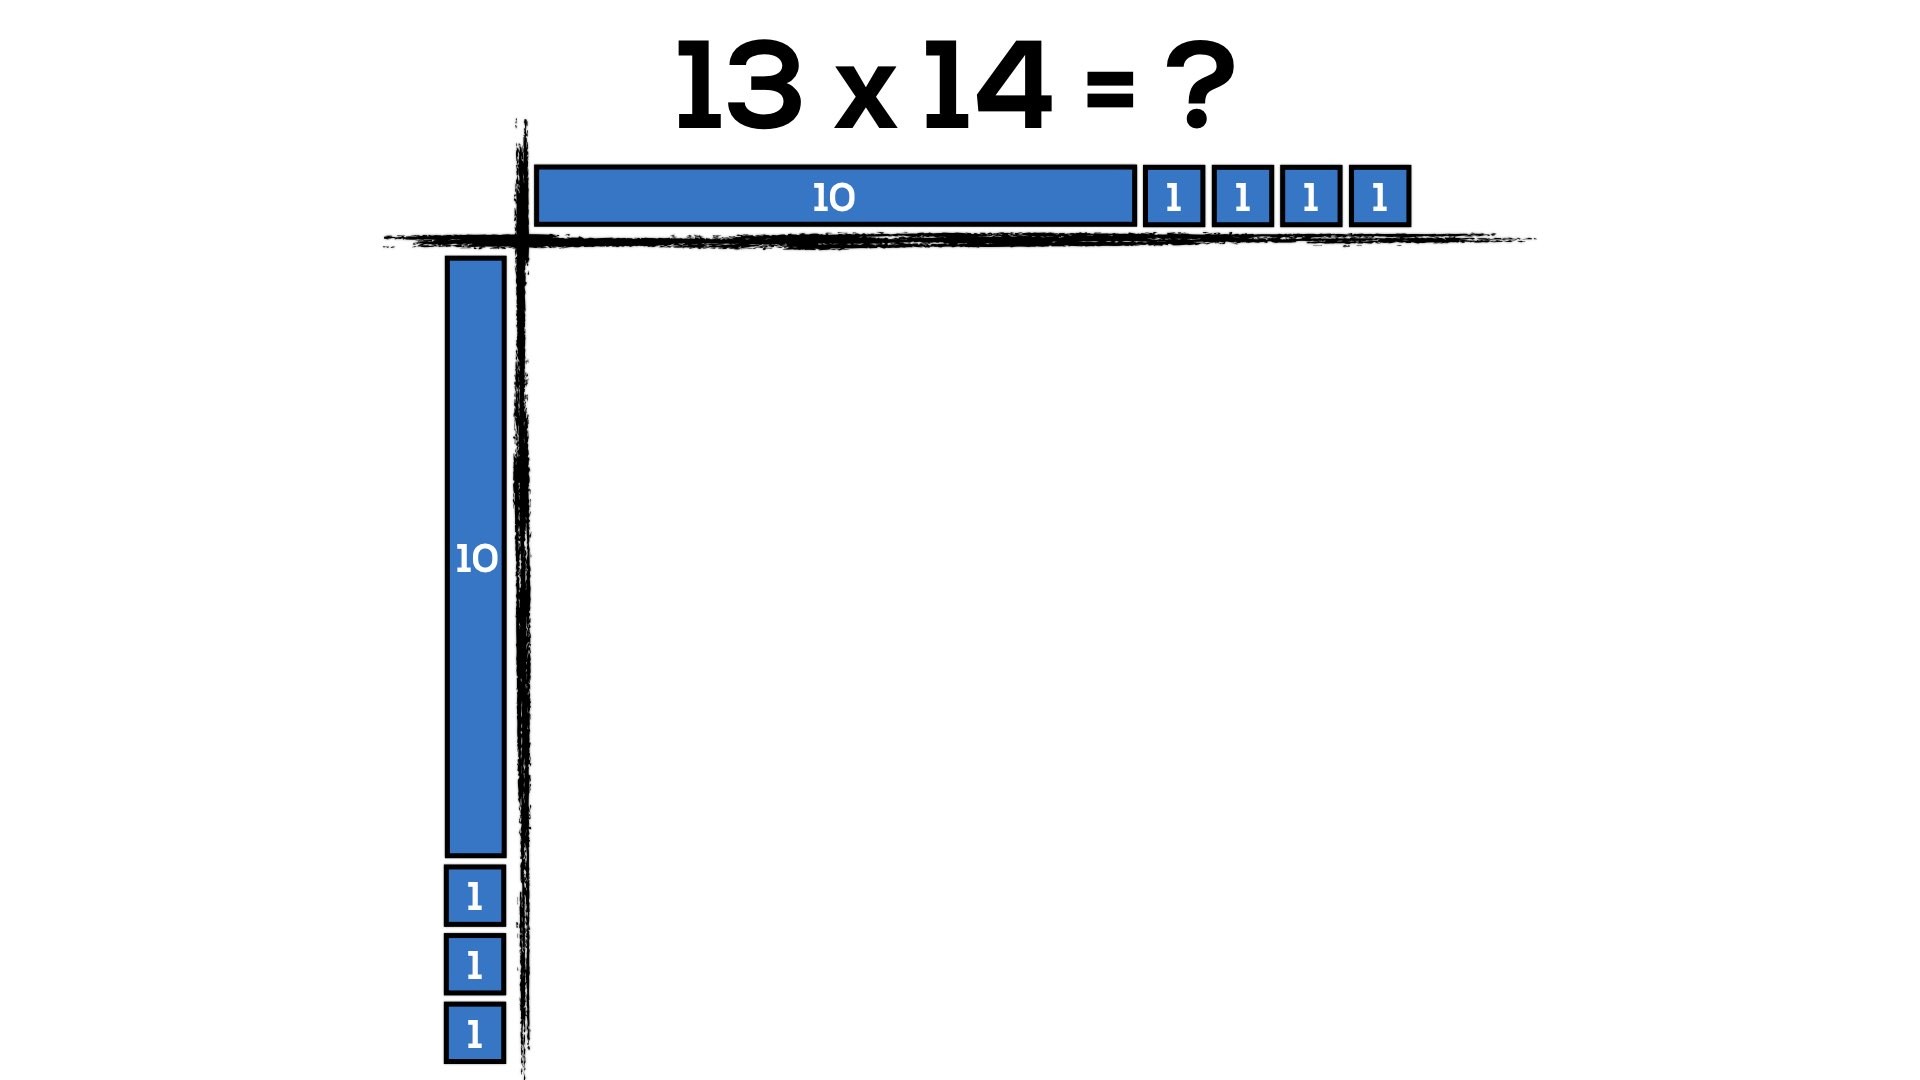 We represent 13 as a “10” rod plus “3” unit tiles.   This reduces the number of manipulatives from 13 pieces to represent the number 13 to only 4 pieces. Cool eh?  So, as you’d probably guess, it’ll take us only 5 pieces…